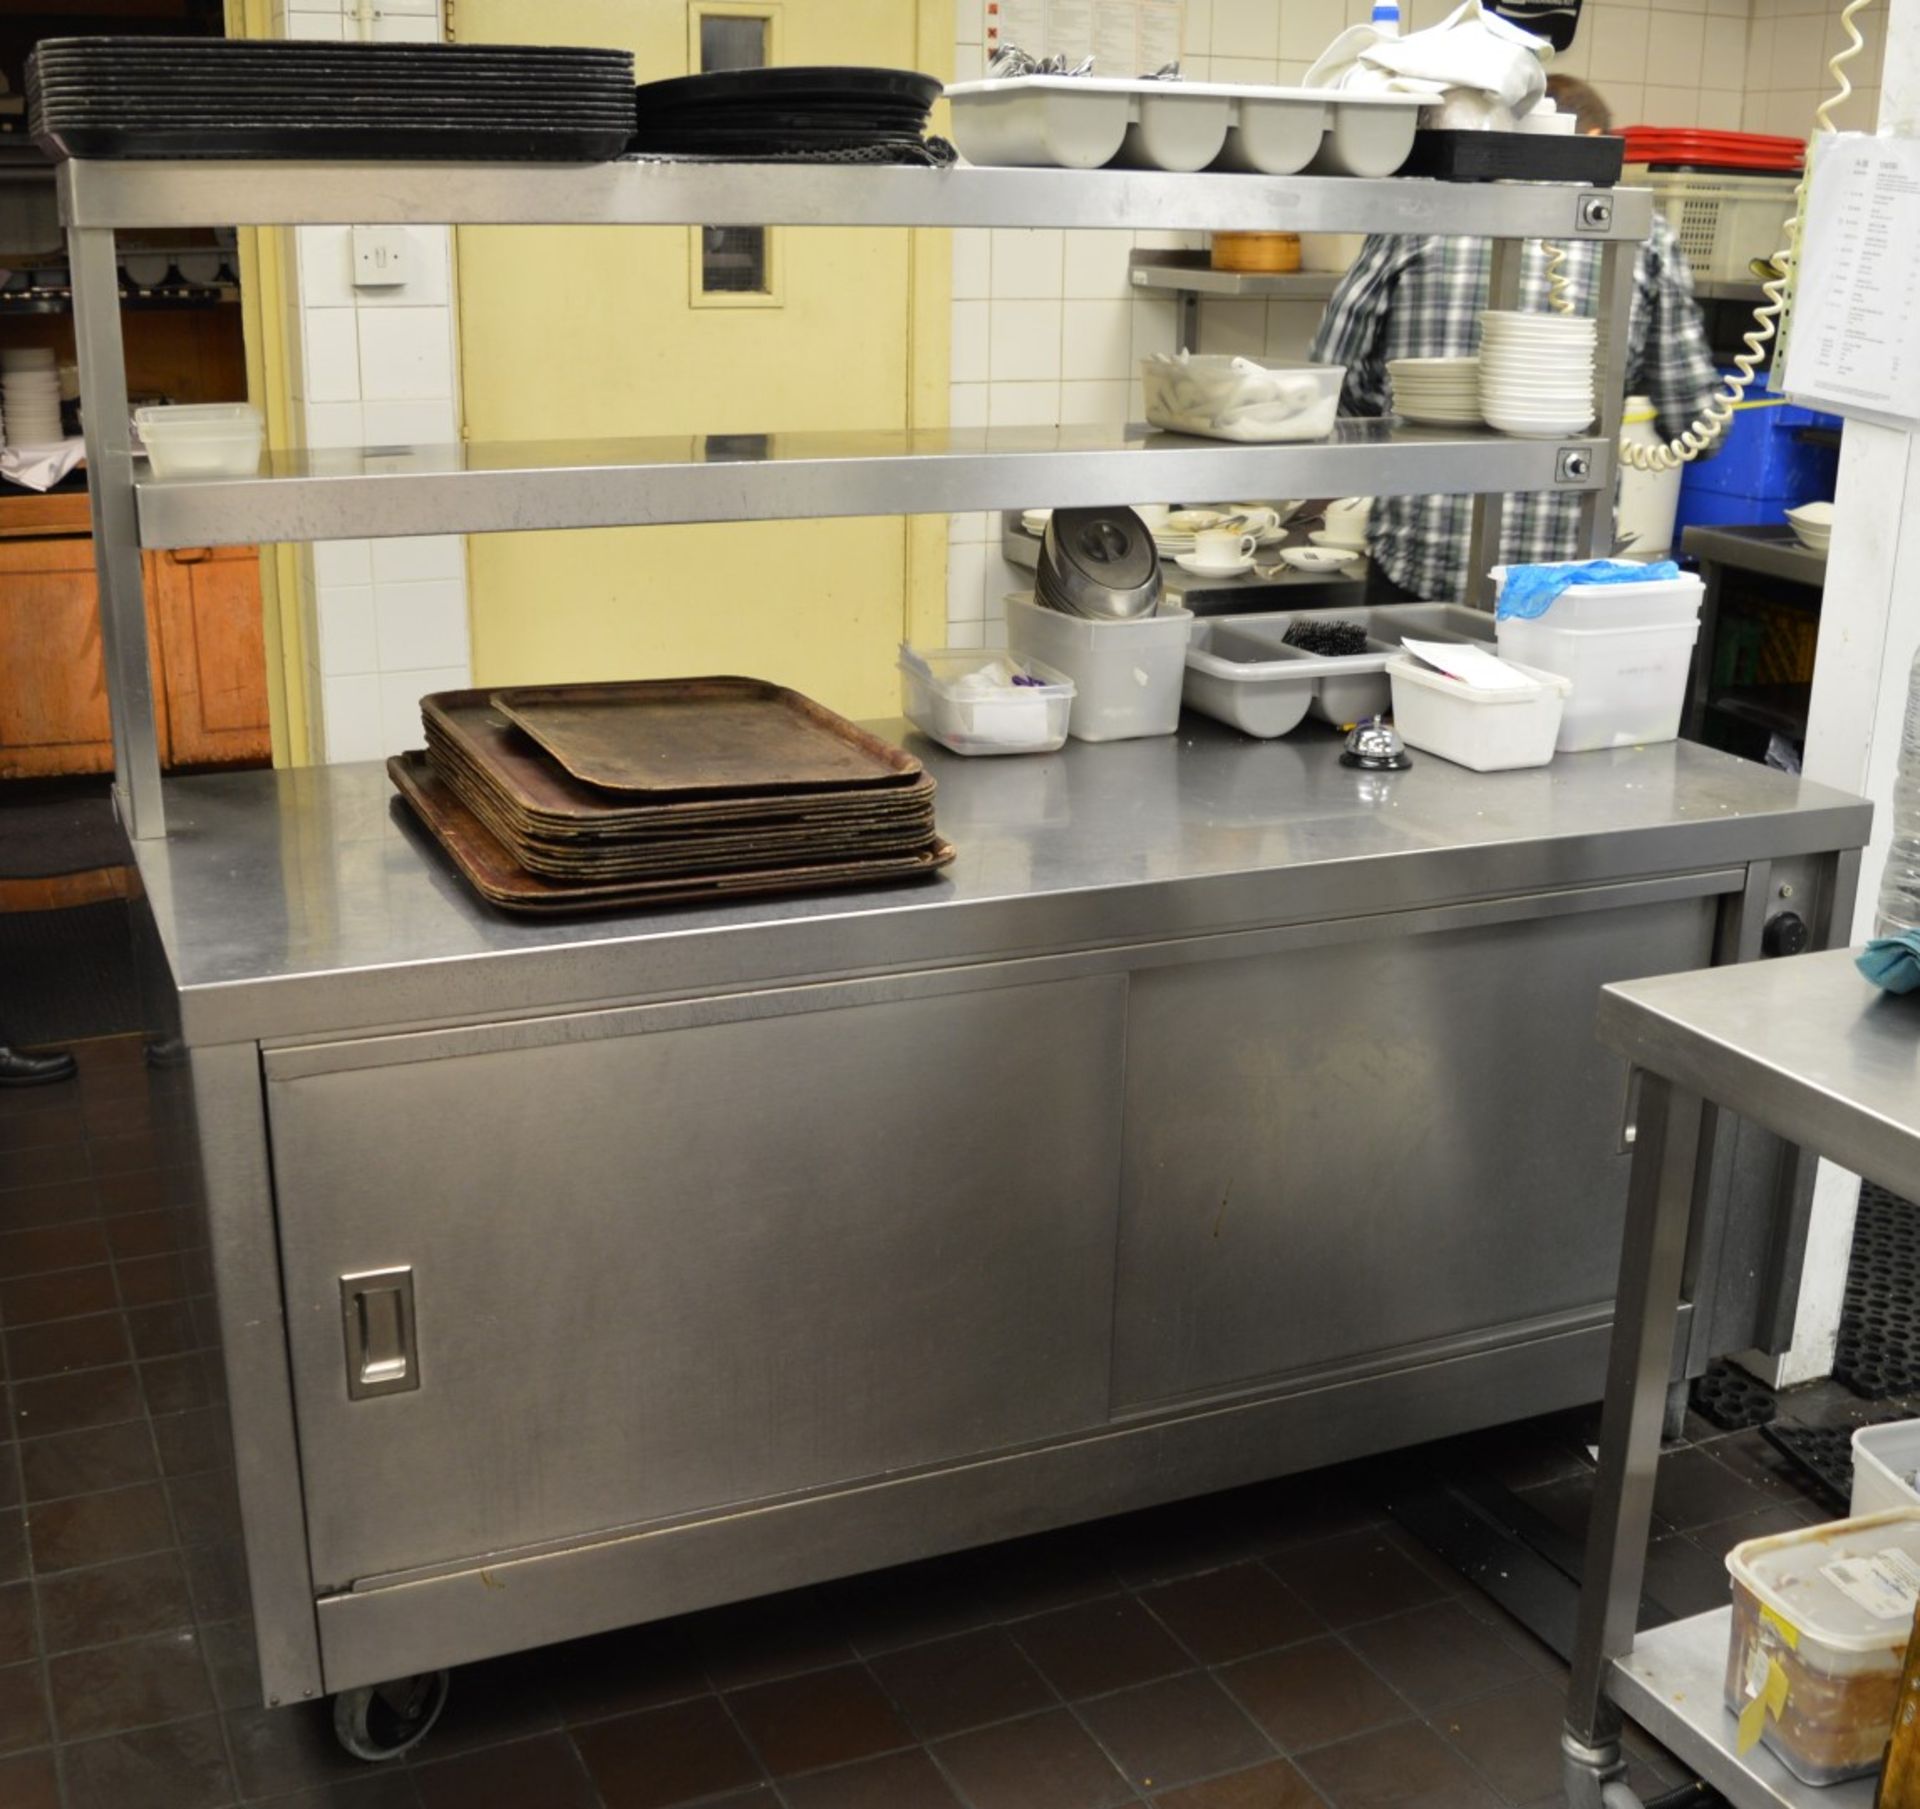 1 x Stainless Steel Prep Counter With Warming Cupboard, Castors and Two Tier Plate Gantry - H83/